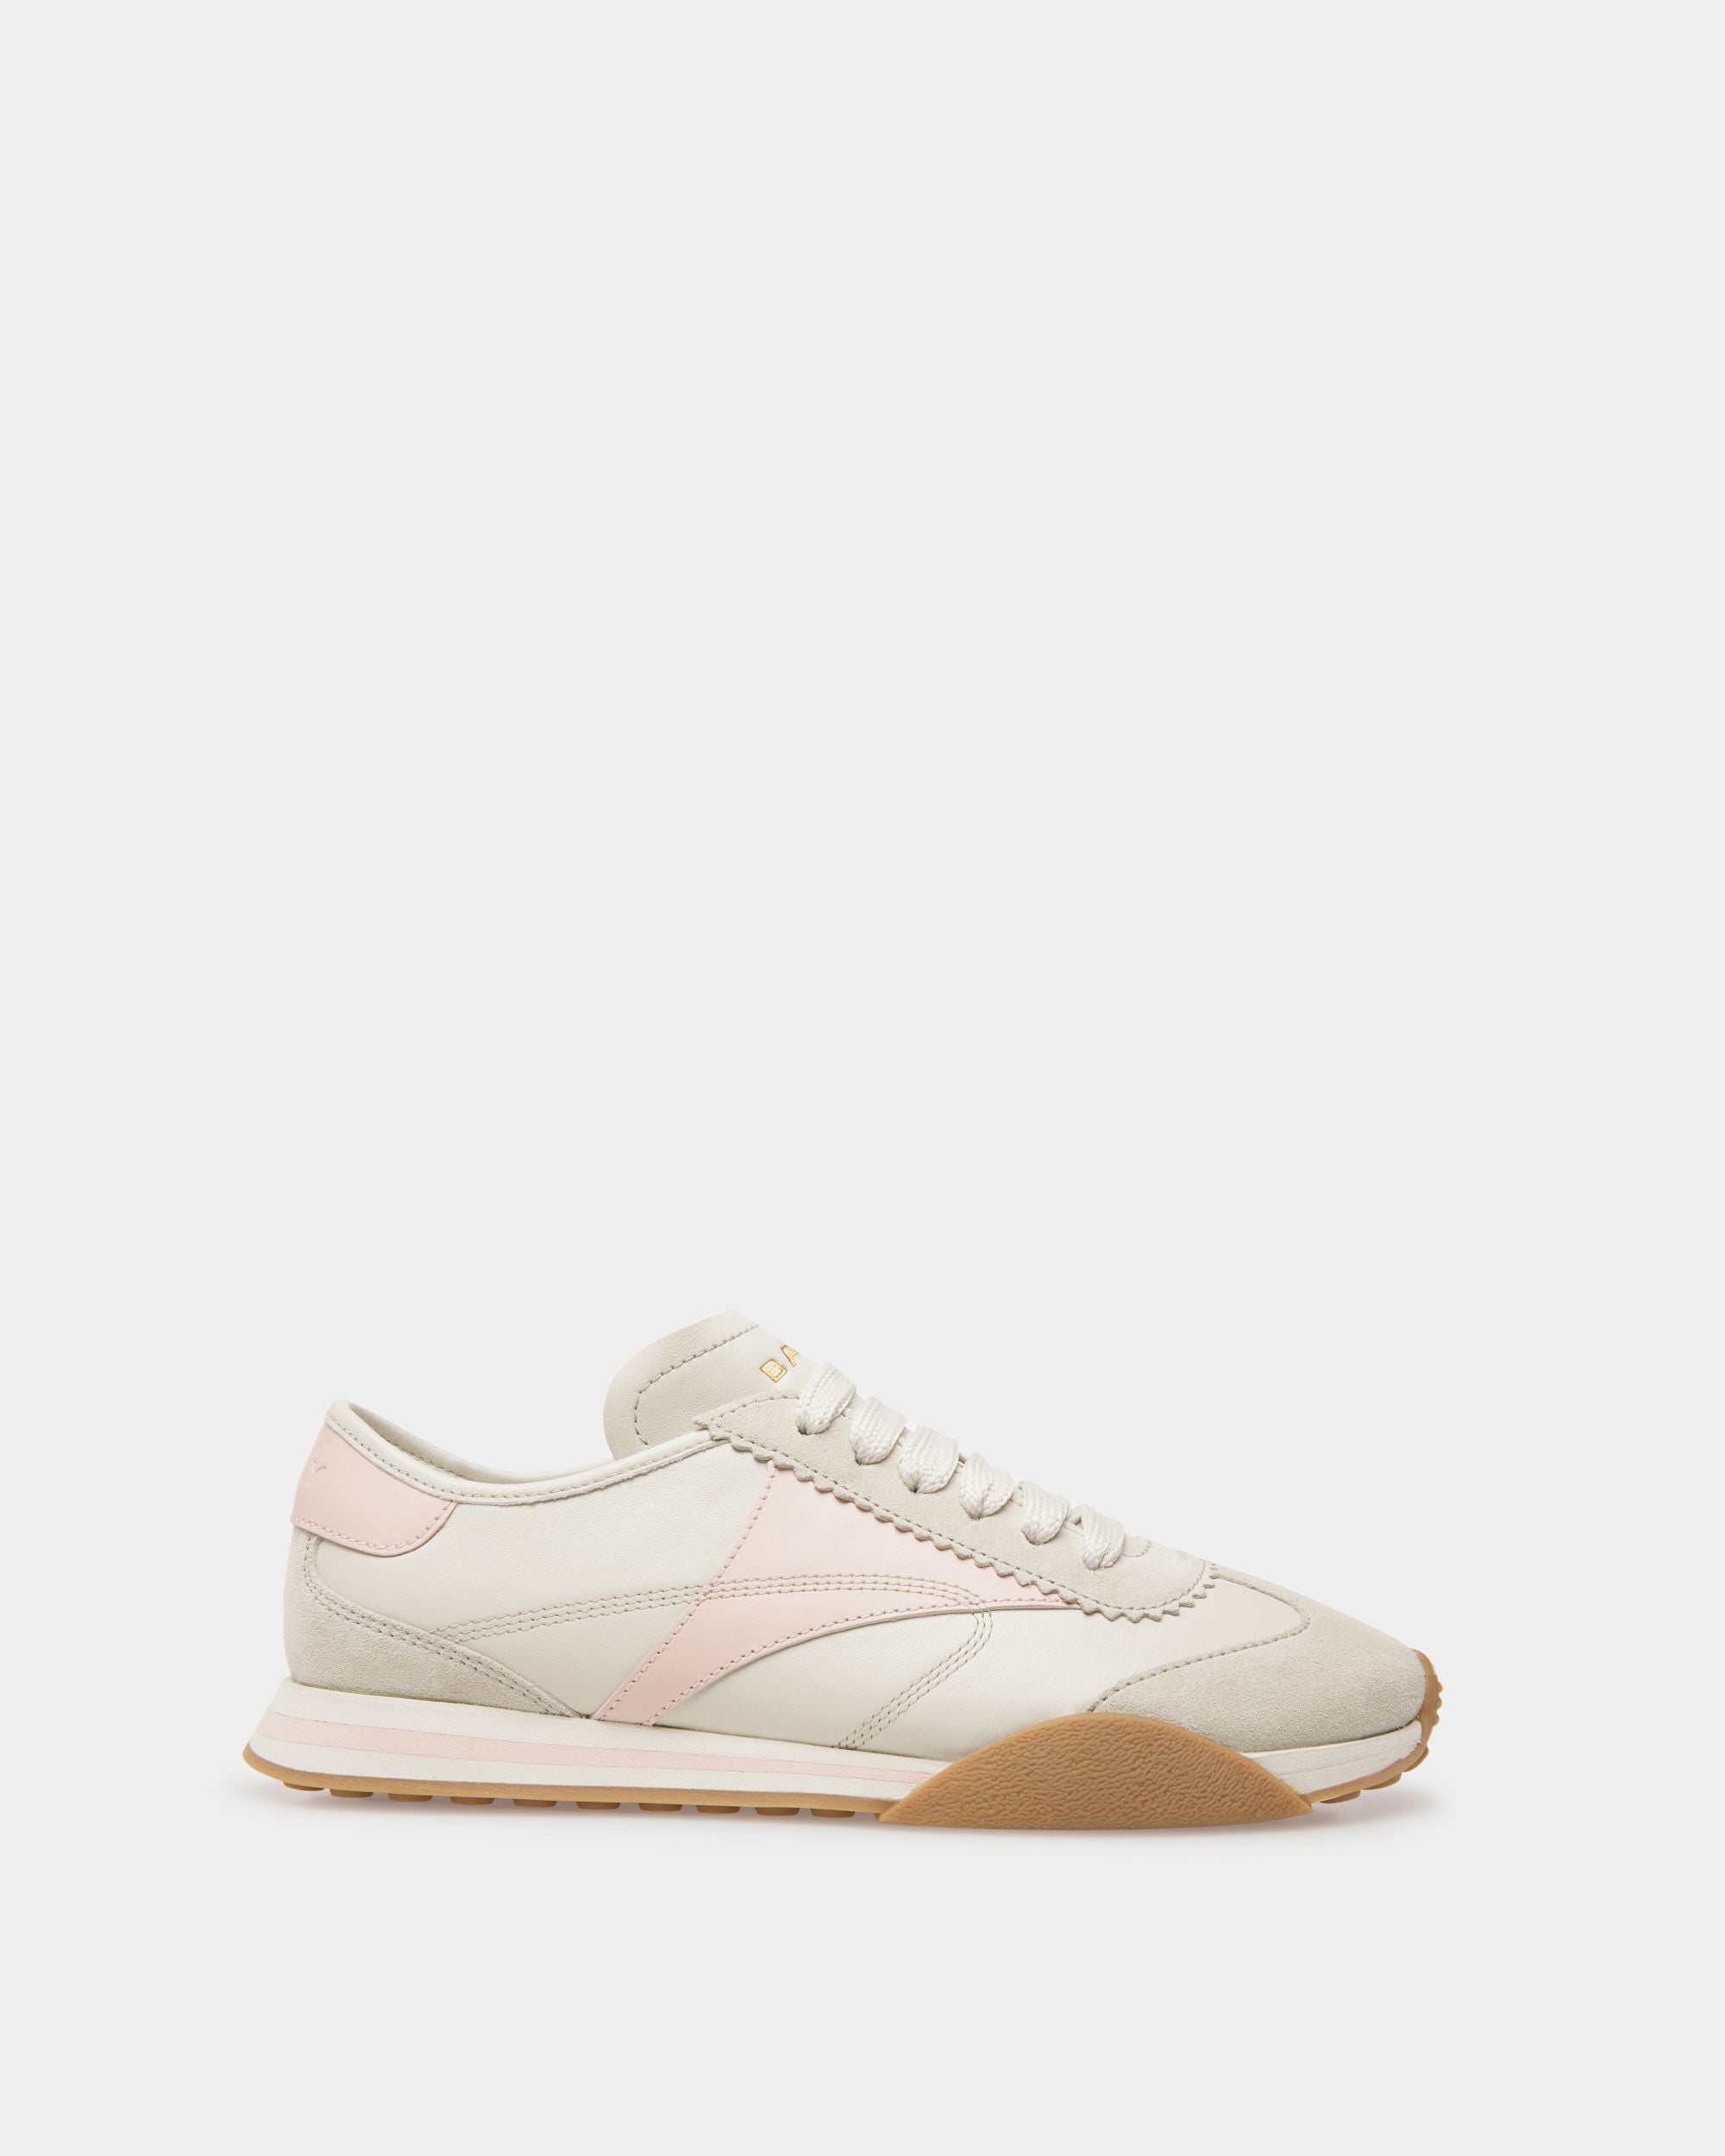 Sonney | Women's Sneakers | Dusty White And Rose Leather | Bally | Still Life Side